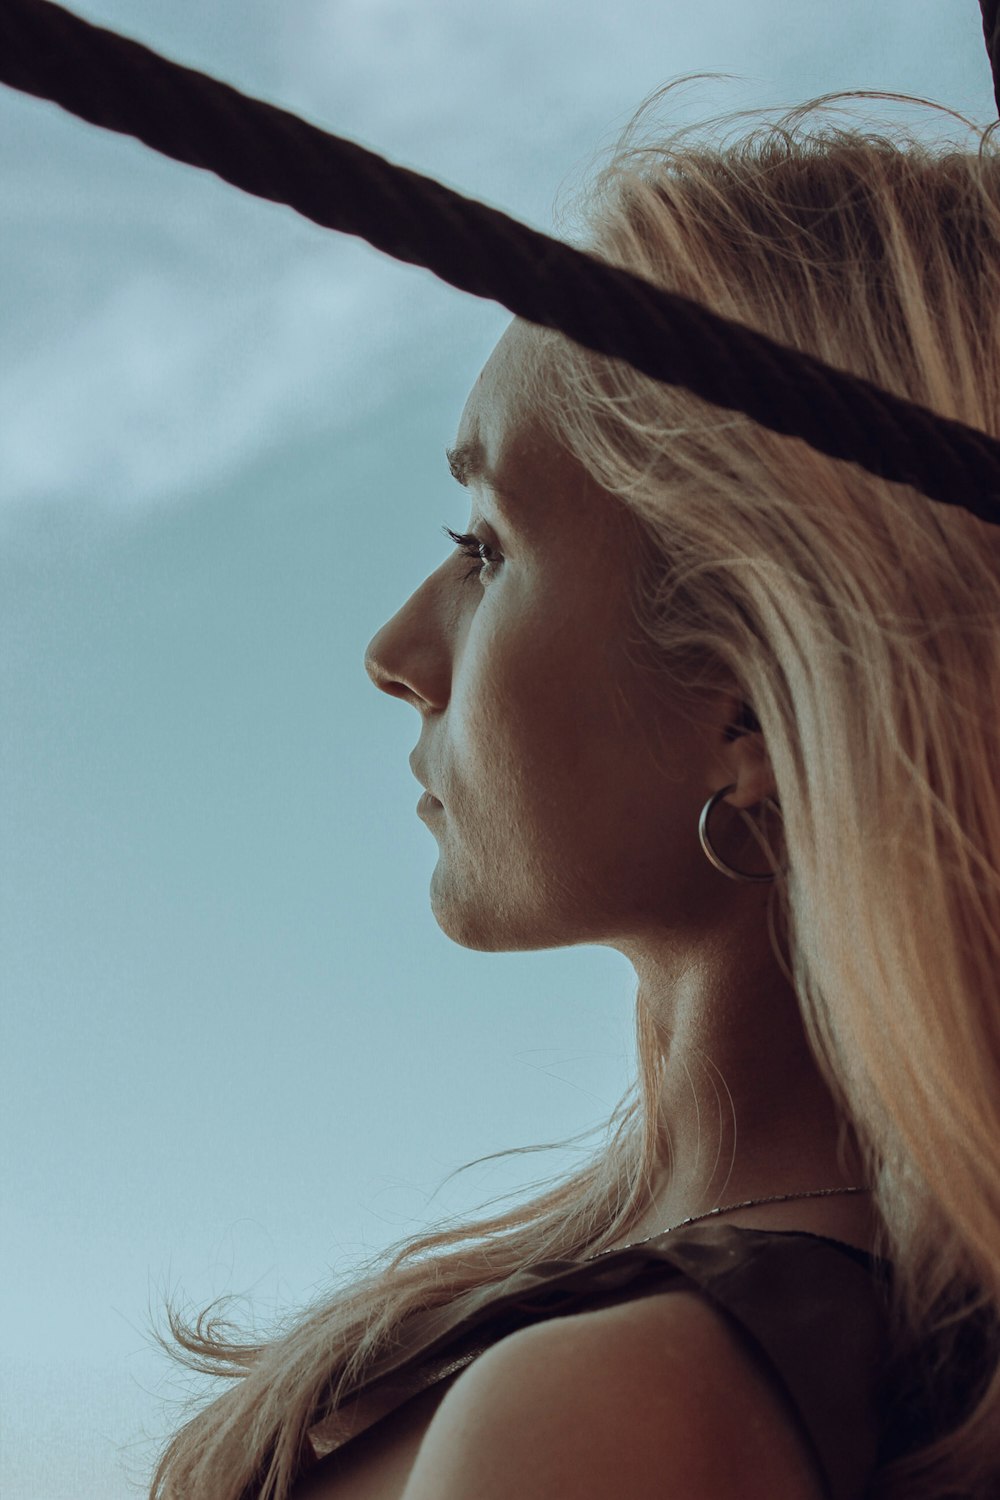 a woman with long blonde hair is looking off into the distance